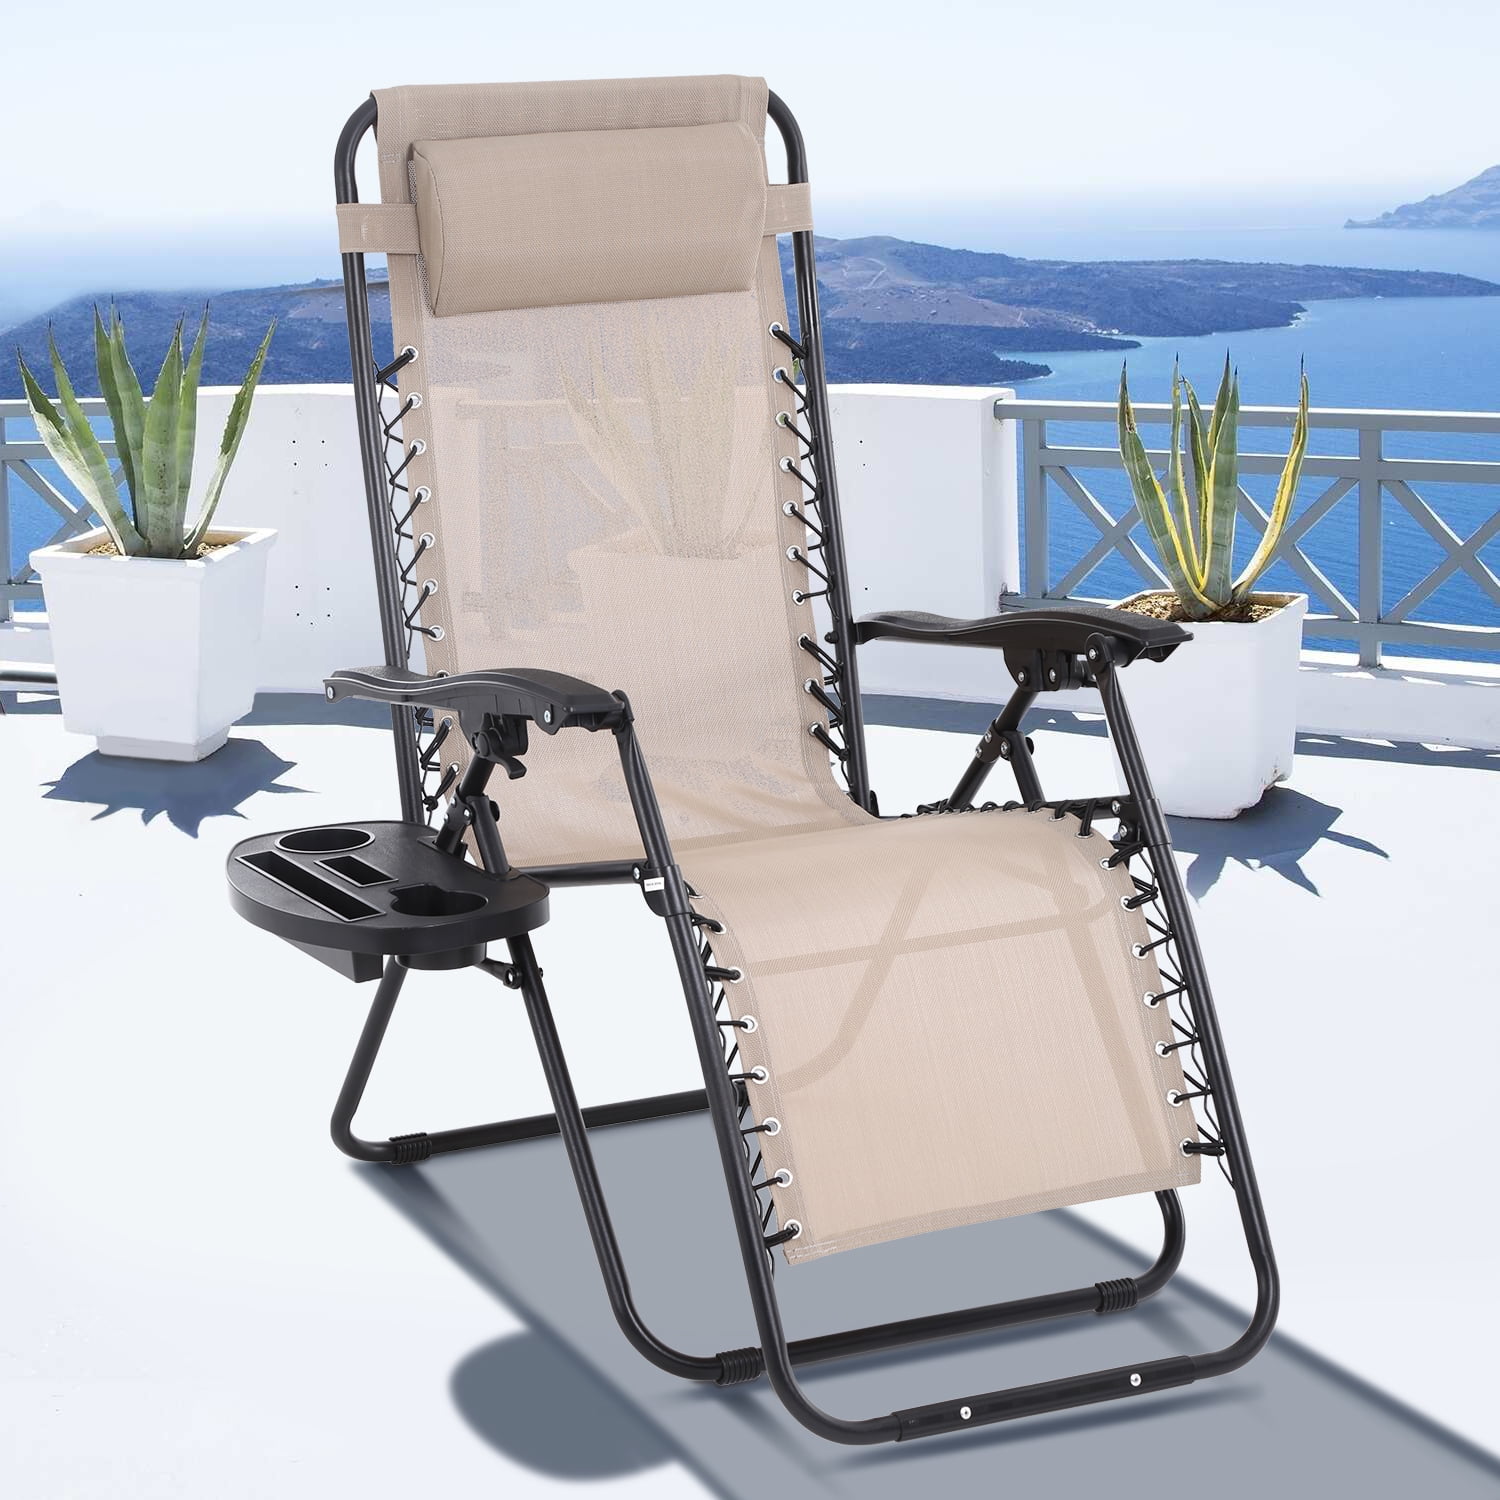 Tan Dkeli Zero Gravity Chair Patio Lounge Chair Chaise 2 Pack Outdoor Folding Adjustable Heavy Duty Recliner Chairs with Cup Holder and Pillows Hold Up to 330Lbs for Patio Yard Lawn Pool Beach 